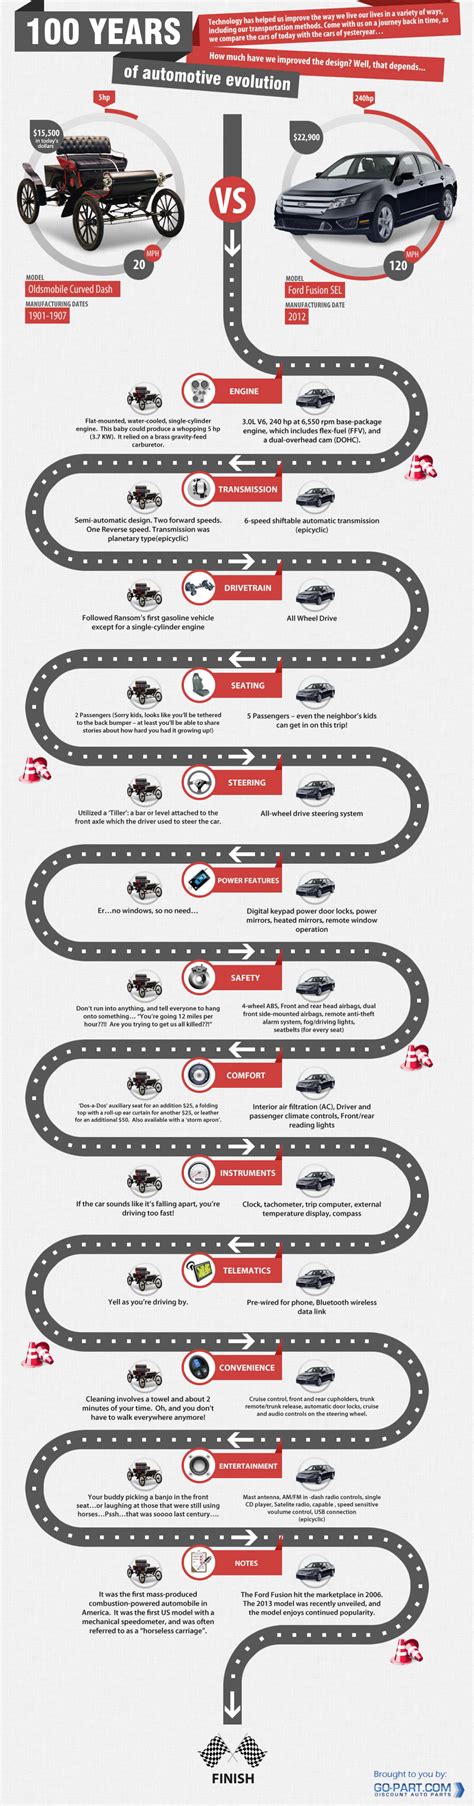 100 Years Of Automotive Evolution Infographic